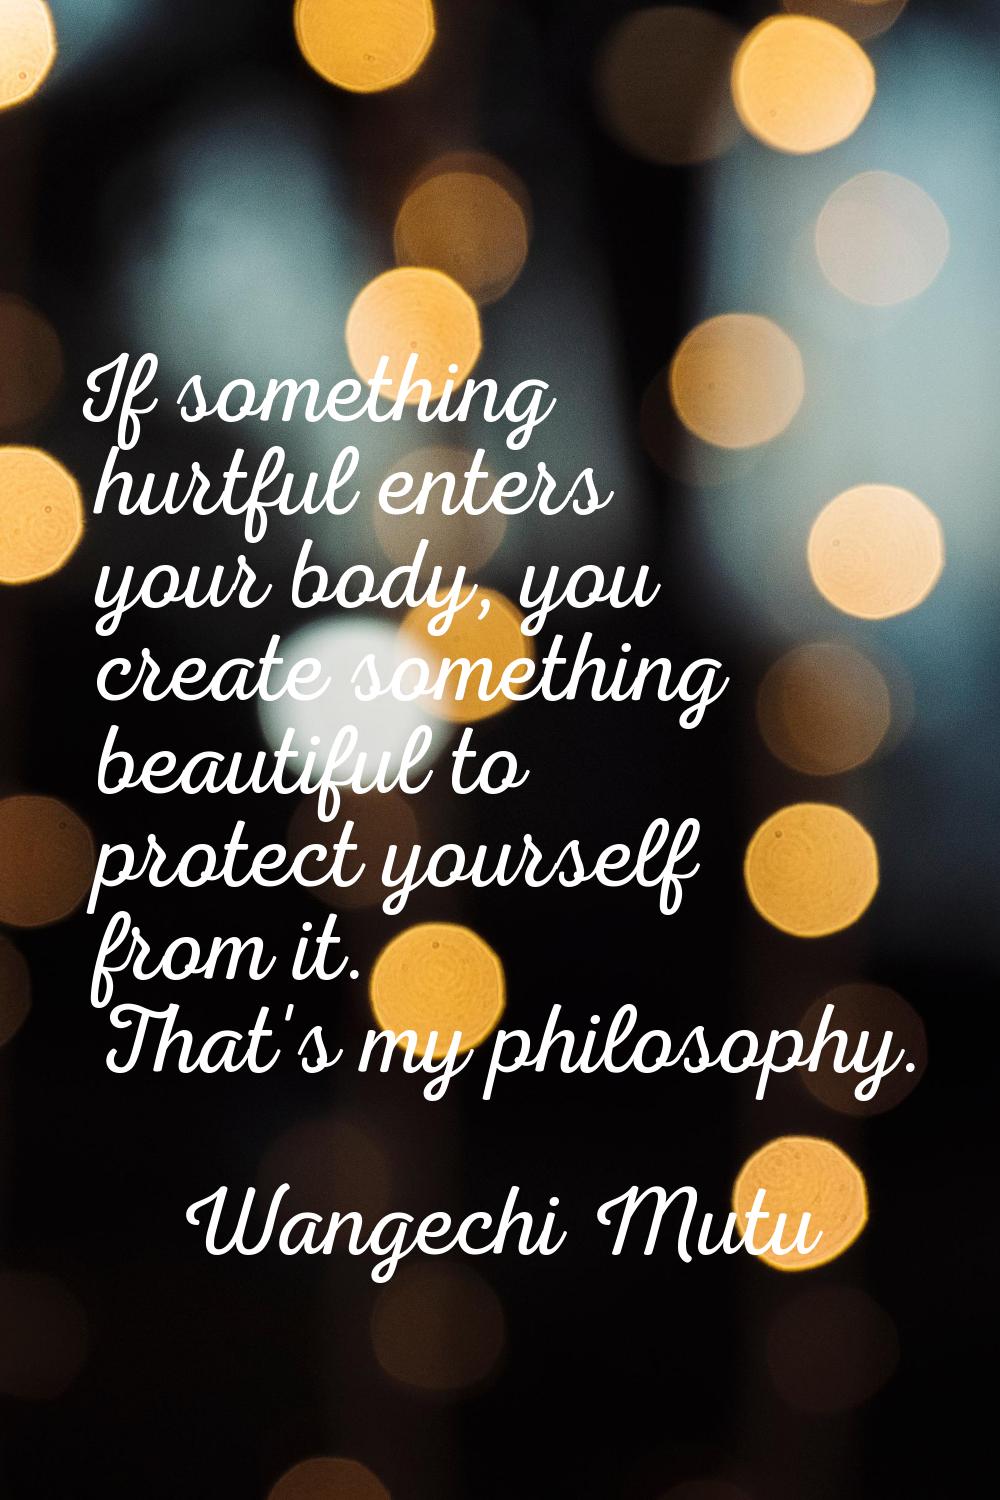 If something hurtful enters your body, you create something beautiful to protect yourself from it. 